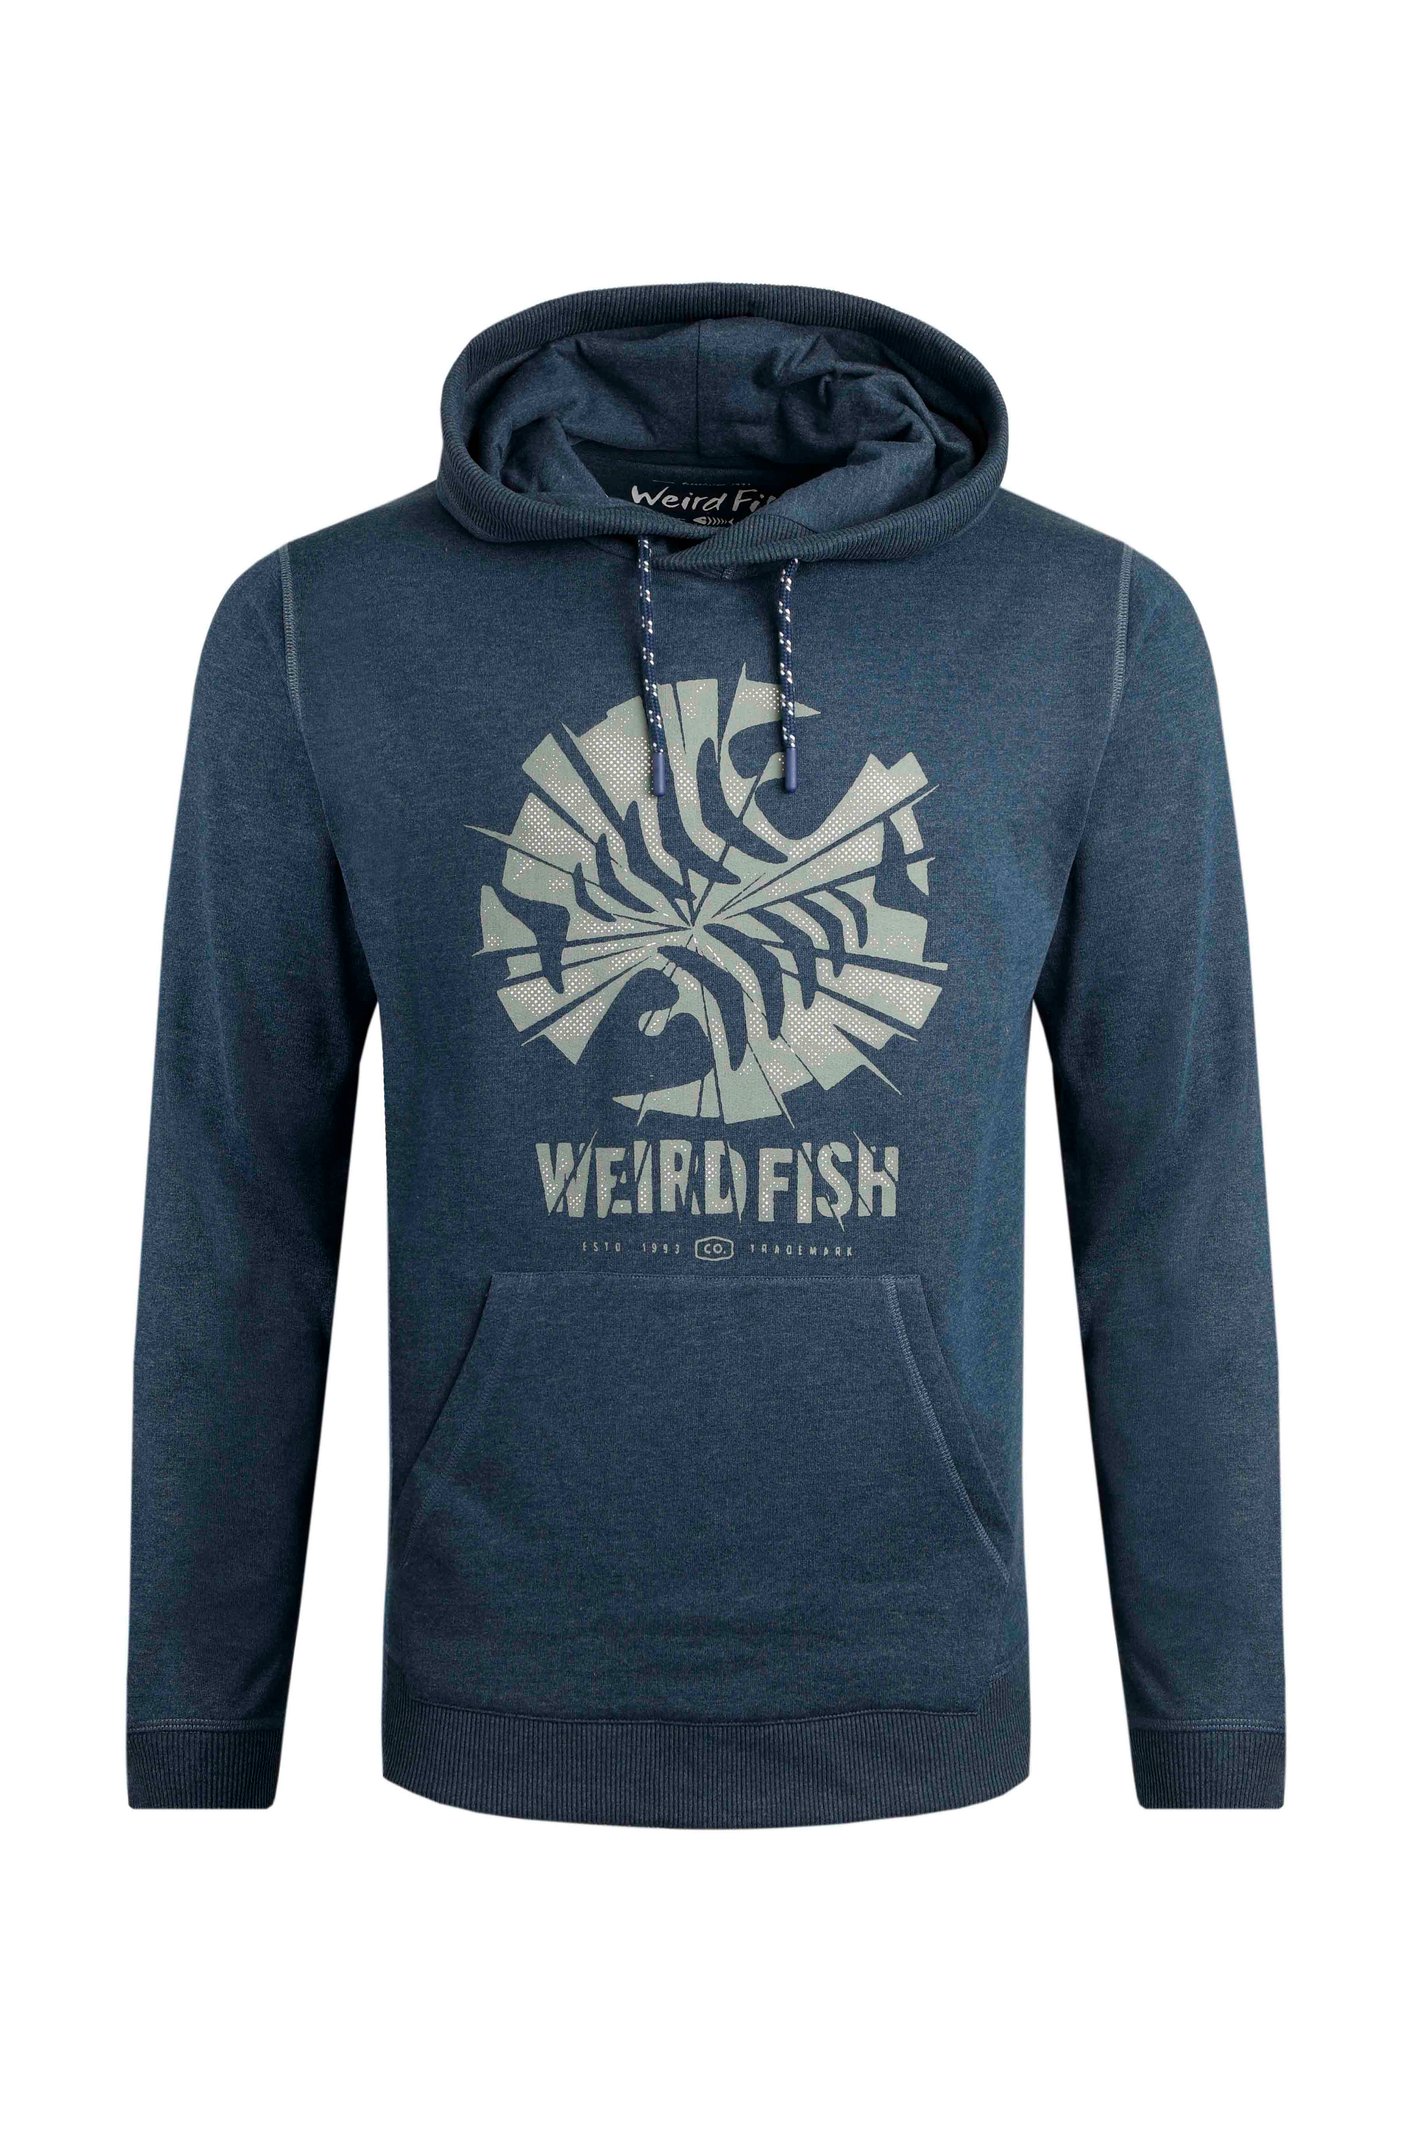 Weird Fish Bryant Graphic Pop Over Hoodie Federal Blue Size S